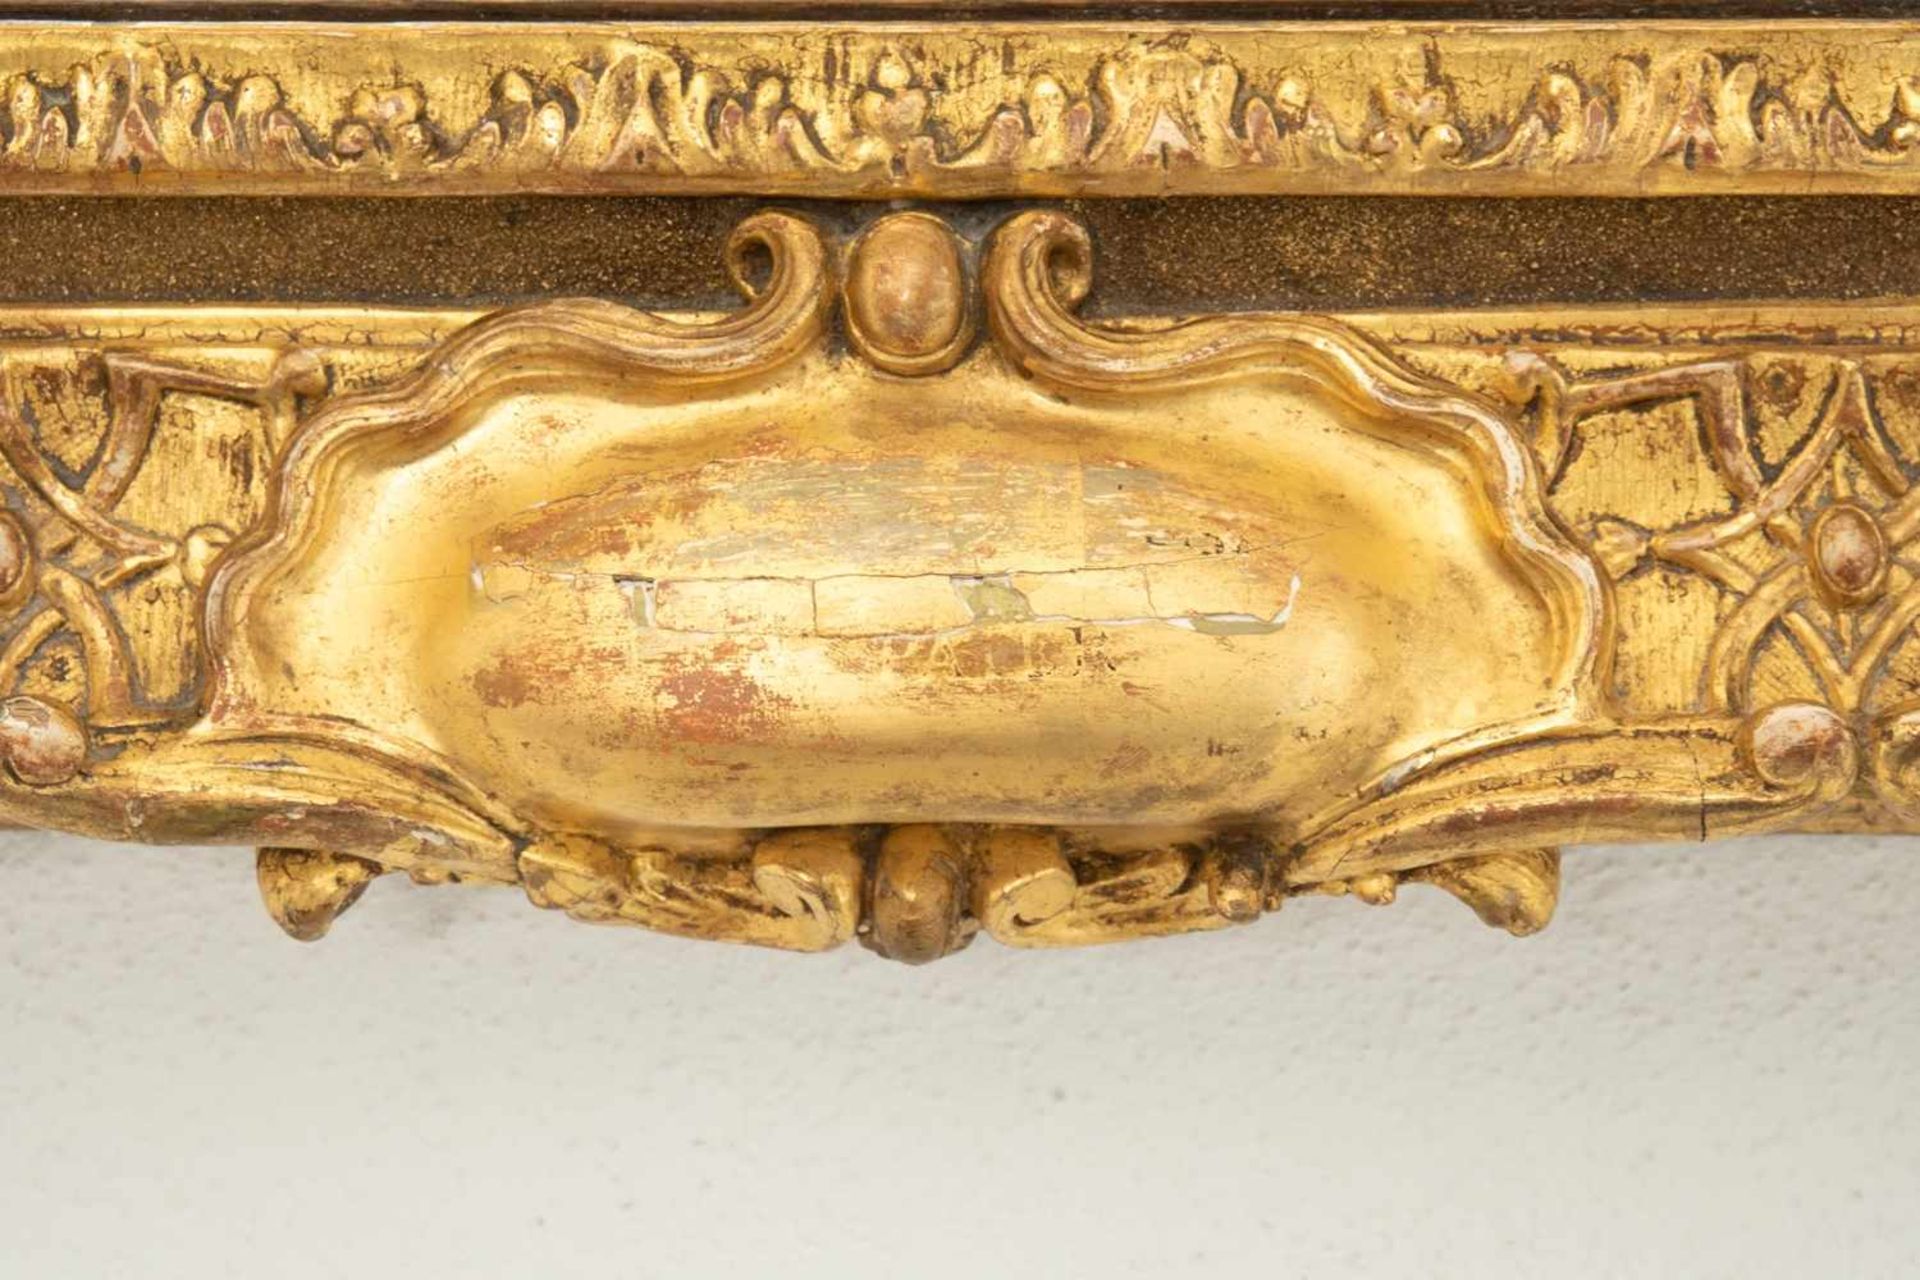 Ornate frame/mirror with crown and coat of arms - Image 2 of 6